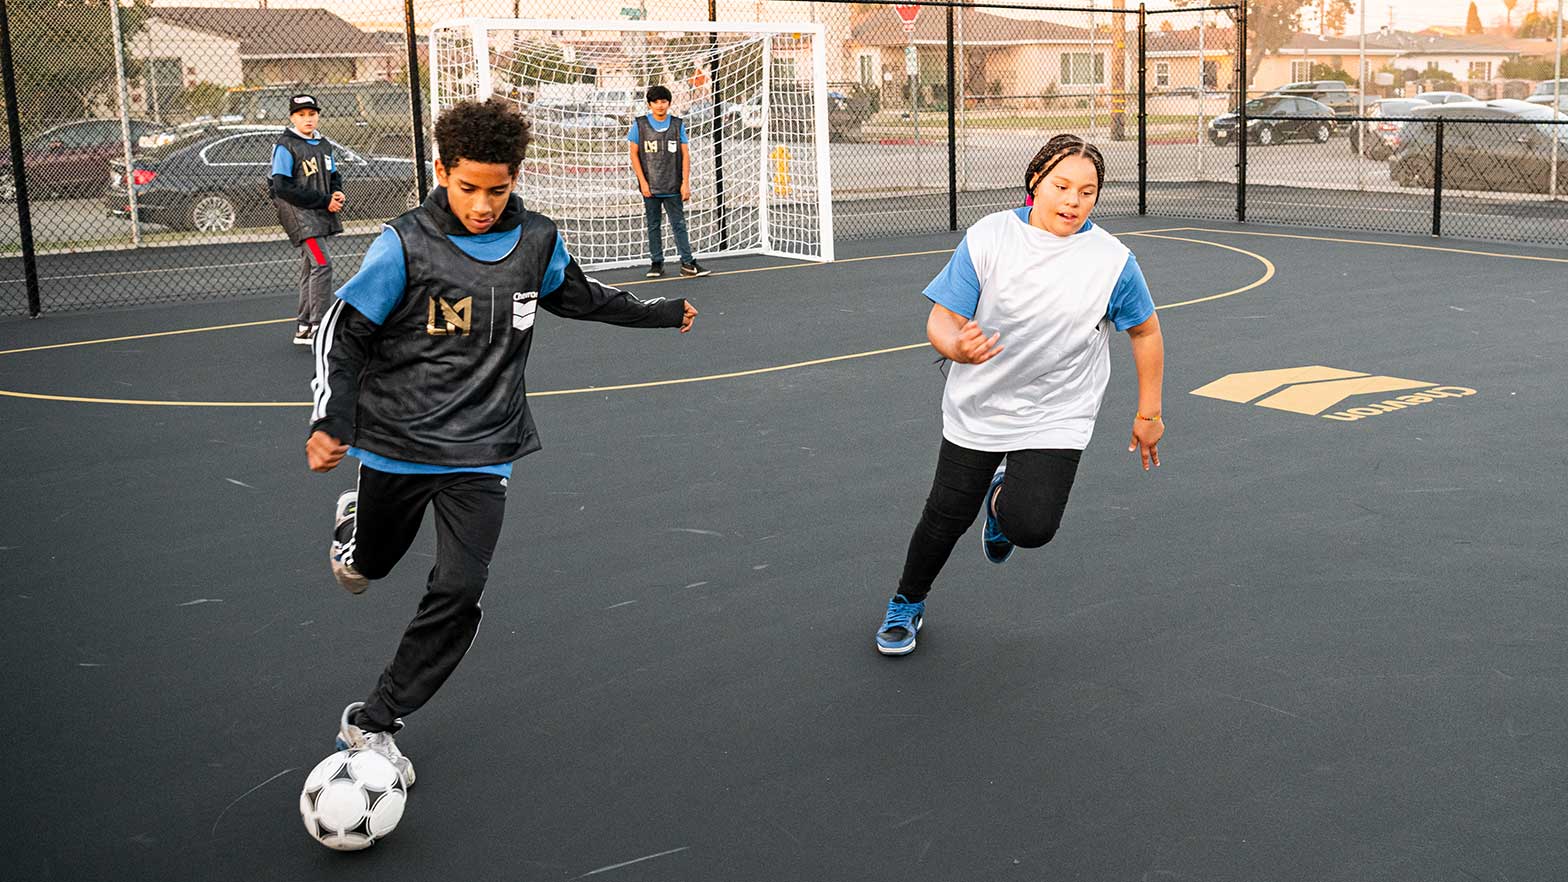 A new futsal court at Prairie Vista Middle School, provided by Chevron and LAFC Foundation, gives local youth new activity opportunities.